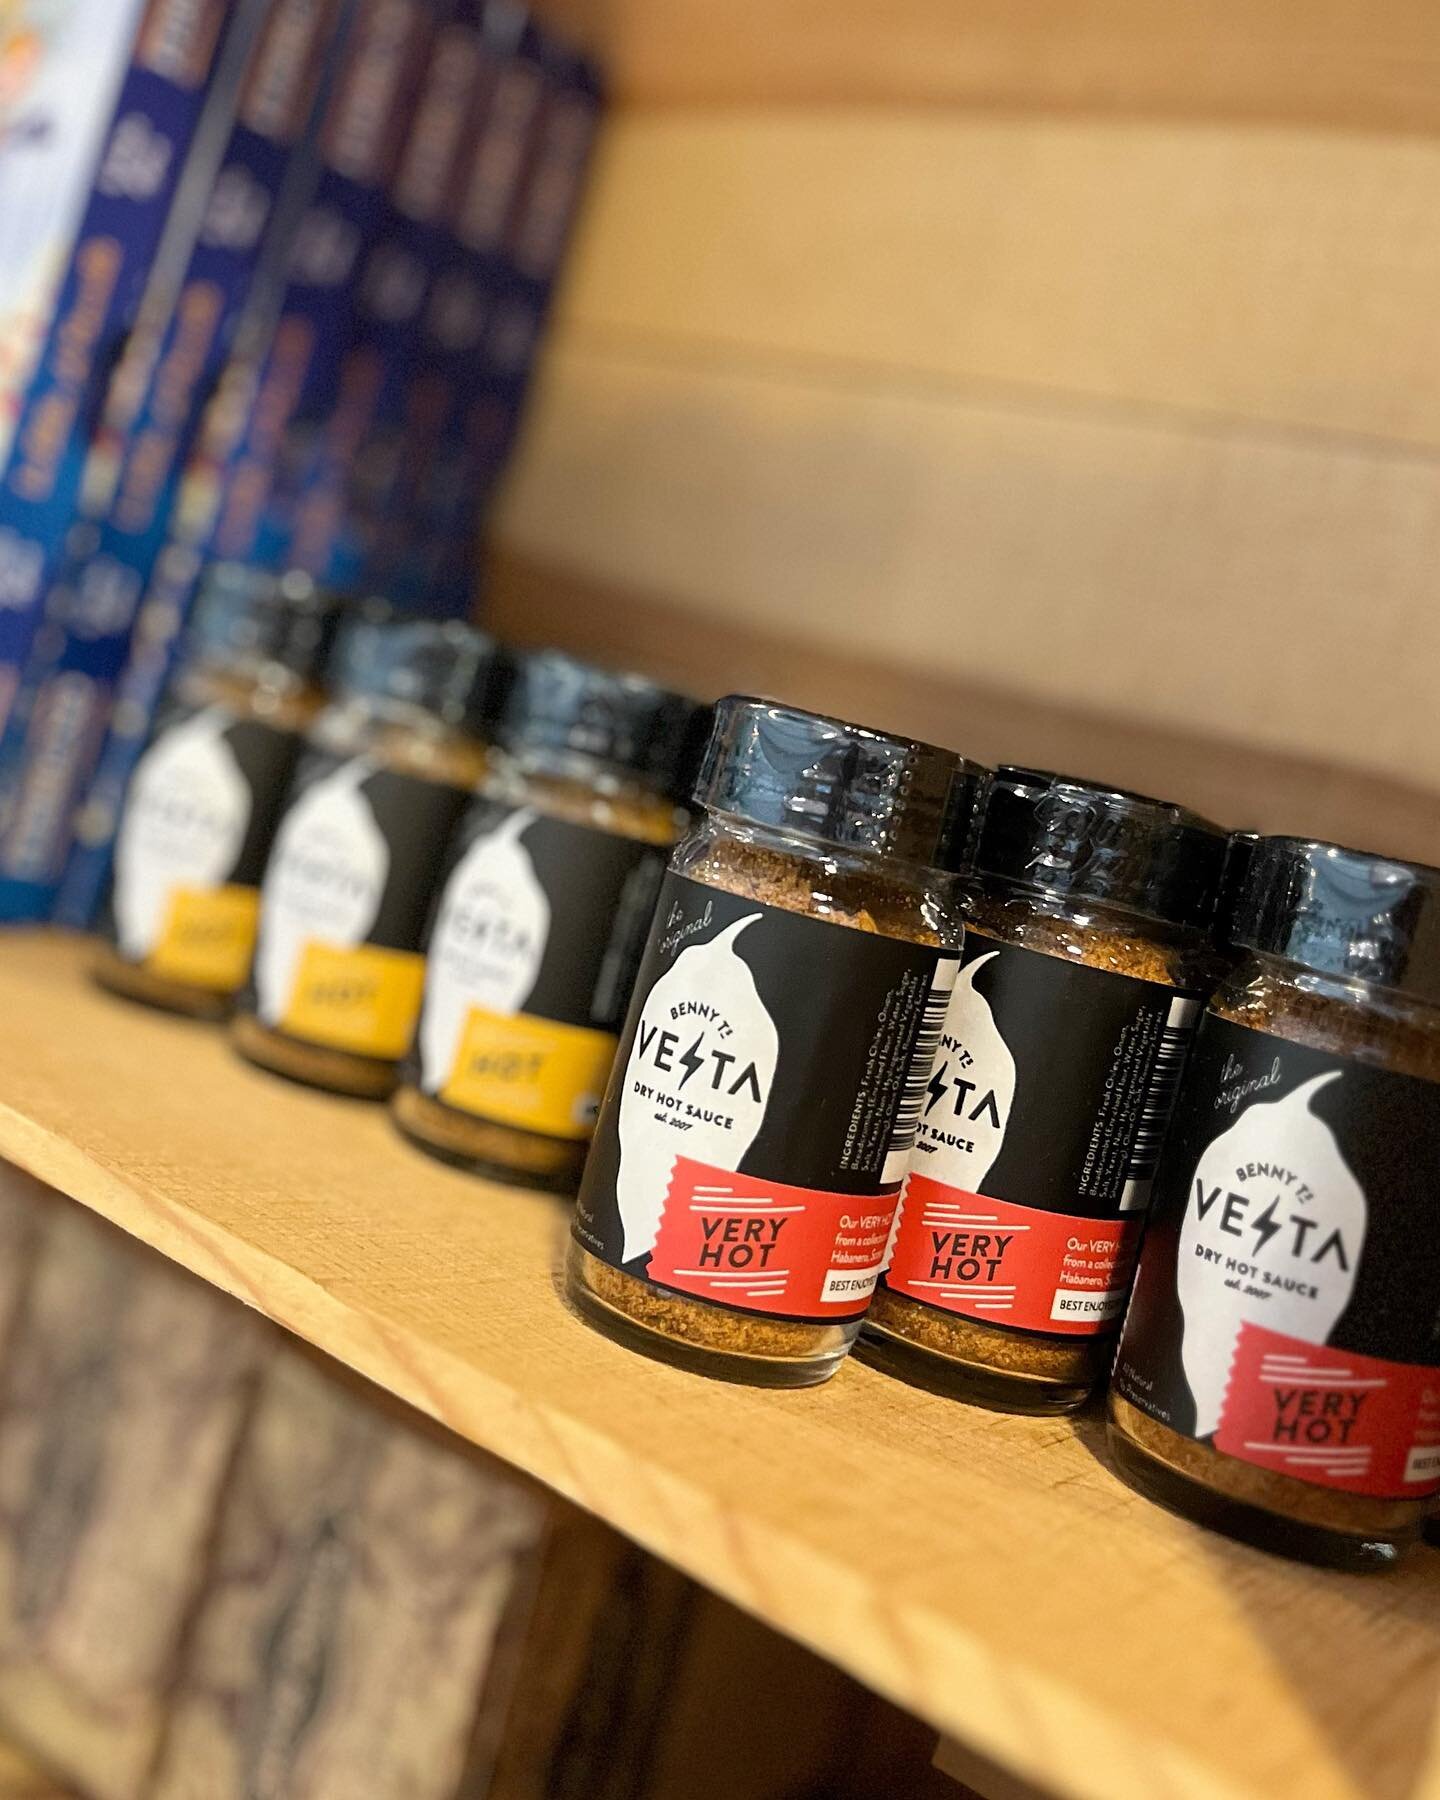 We&rsquo;re back &amp; fully stocked at @wineauthorities ❤️&zwj;🔥🍇🍷 pop into their beautiful Raleigh store and grab some Vesta with your next bottle of vino #whatdoyouvesta 
&bull;
&bull;
&bull;
#HotSauceLovers
#SpicyFood
#HotSauceAddict
#SauceLif